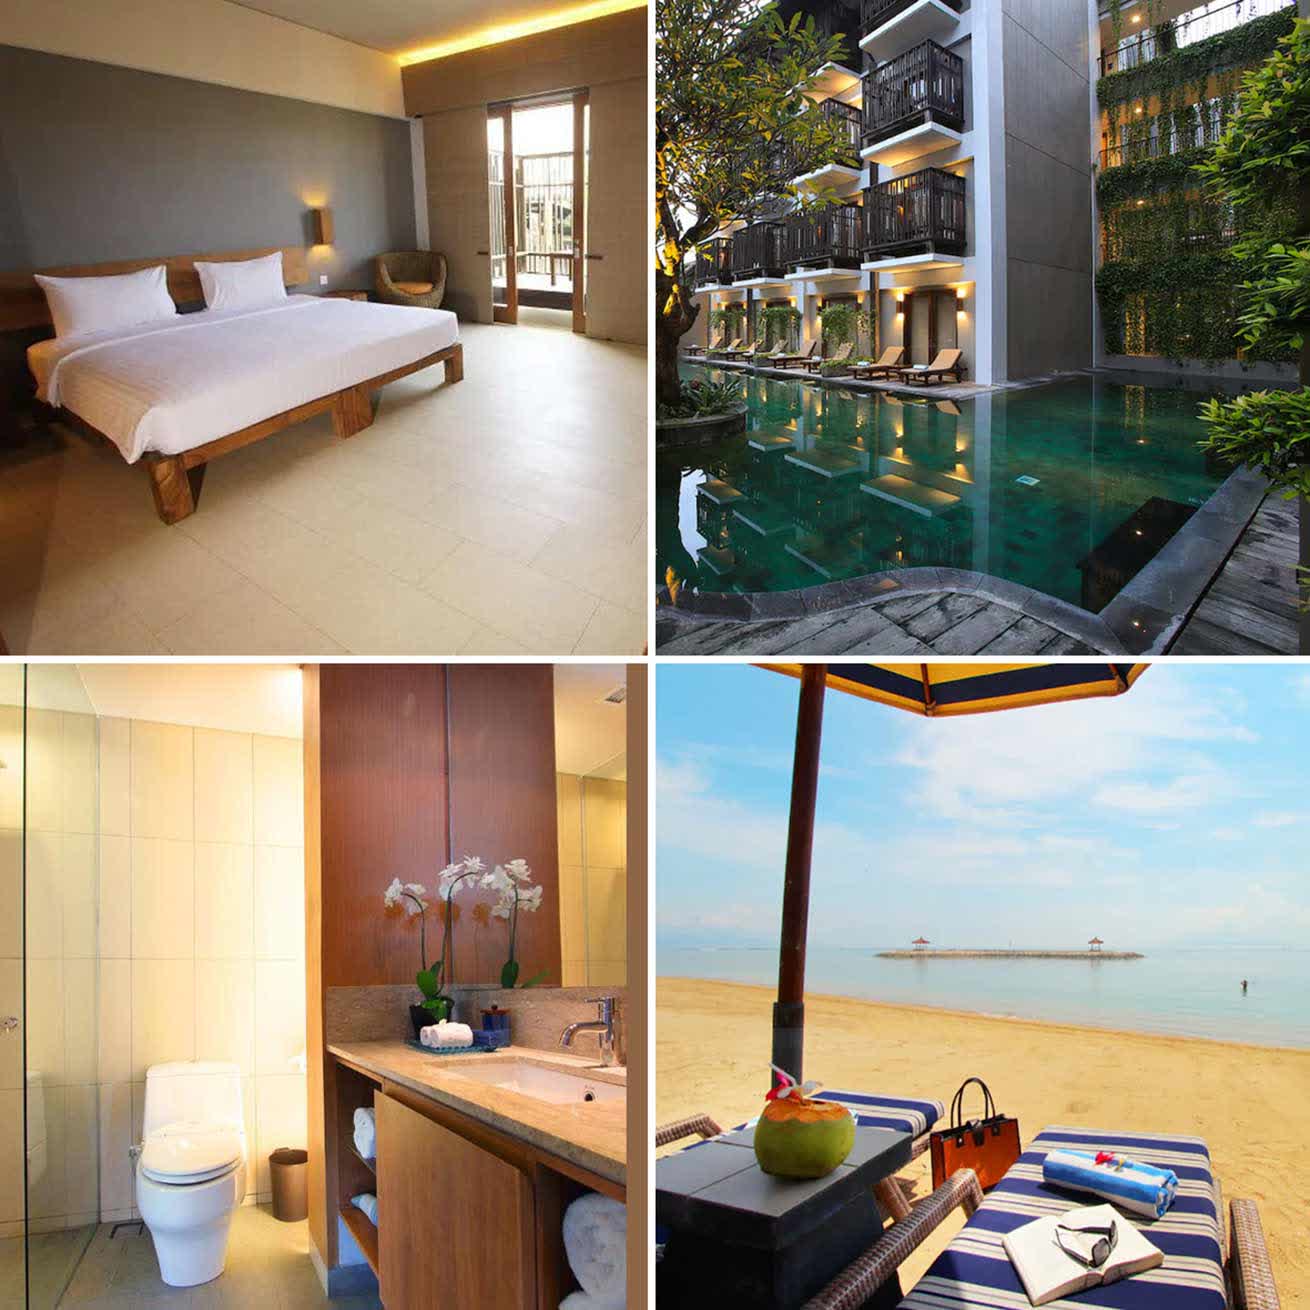 THE 1O1 Bali Oasis Sanur - the place to live and relax by the pool